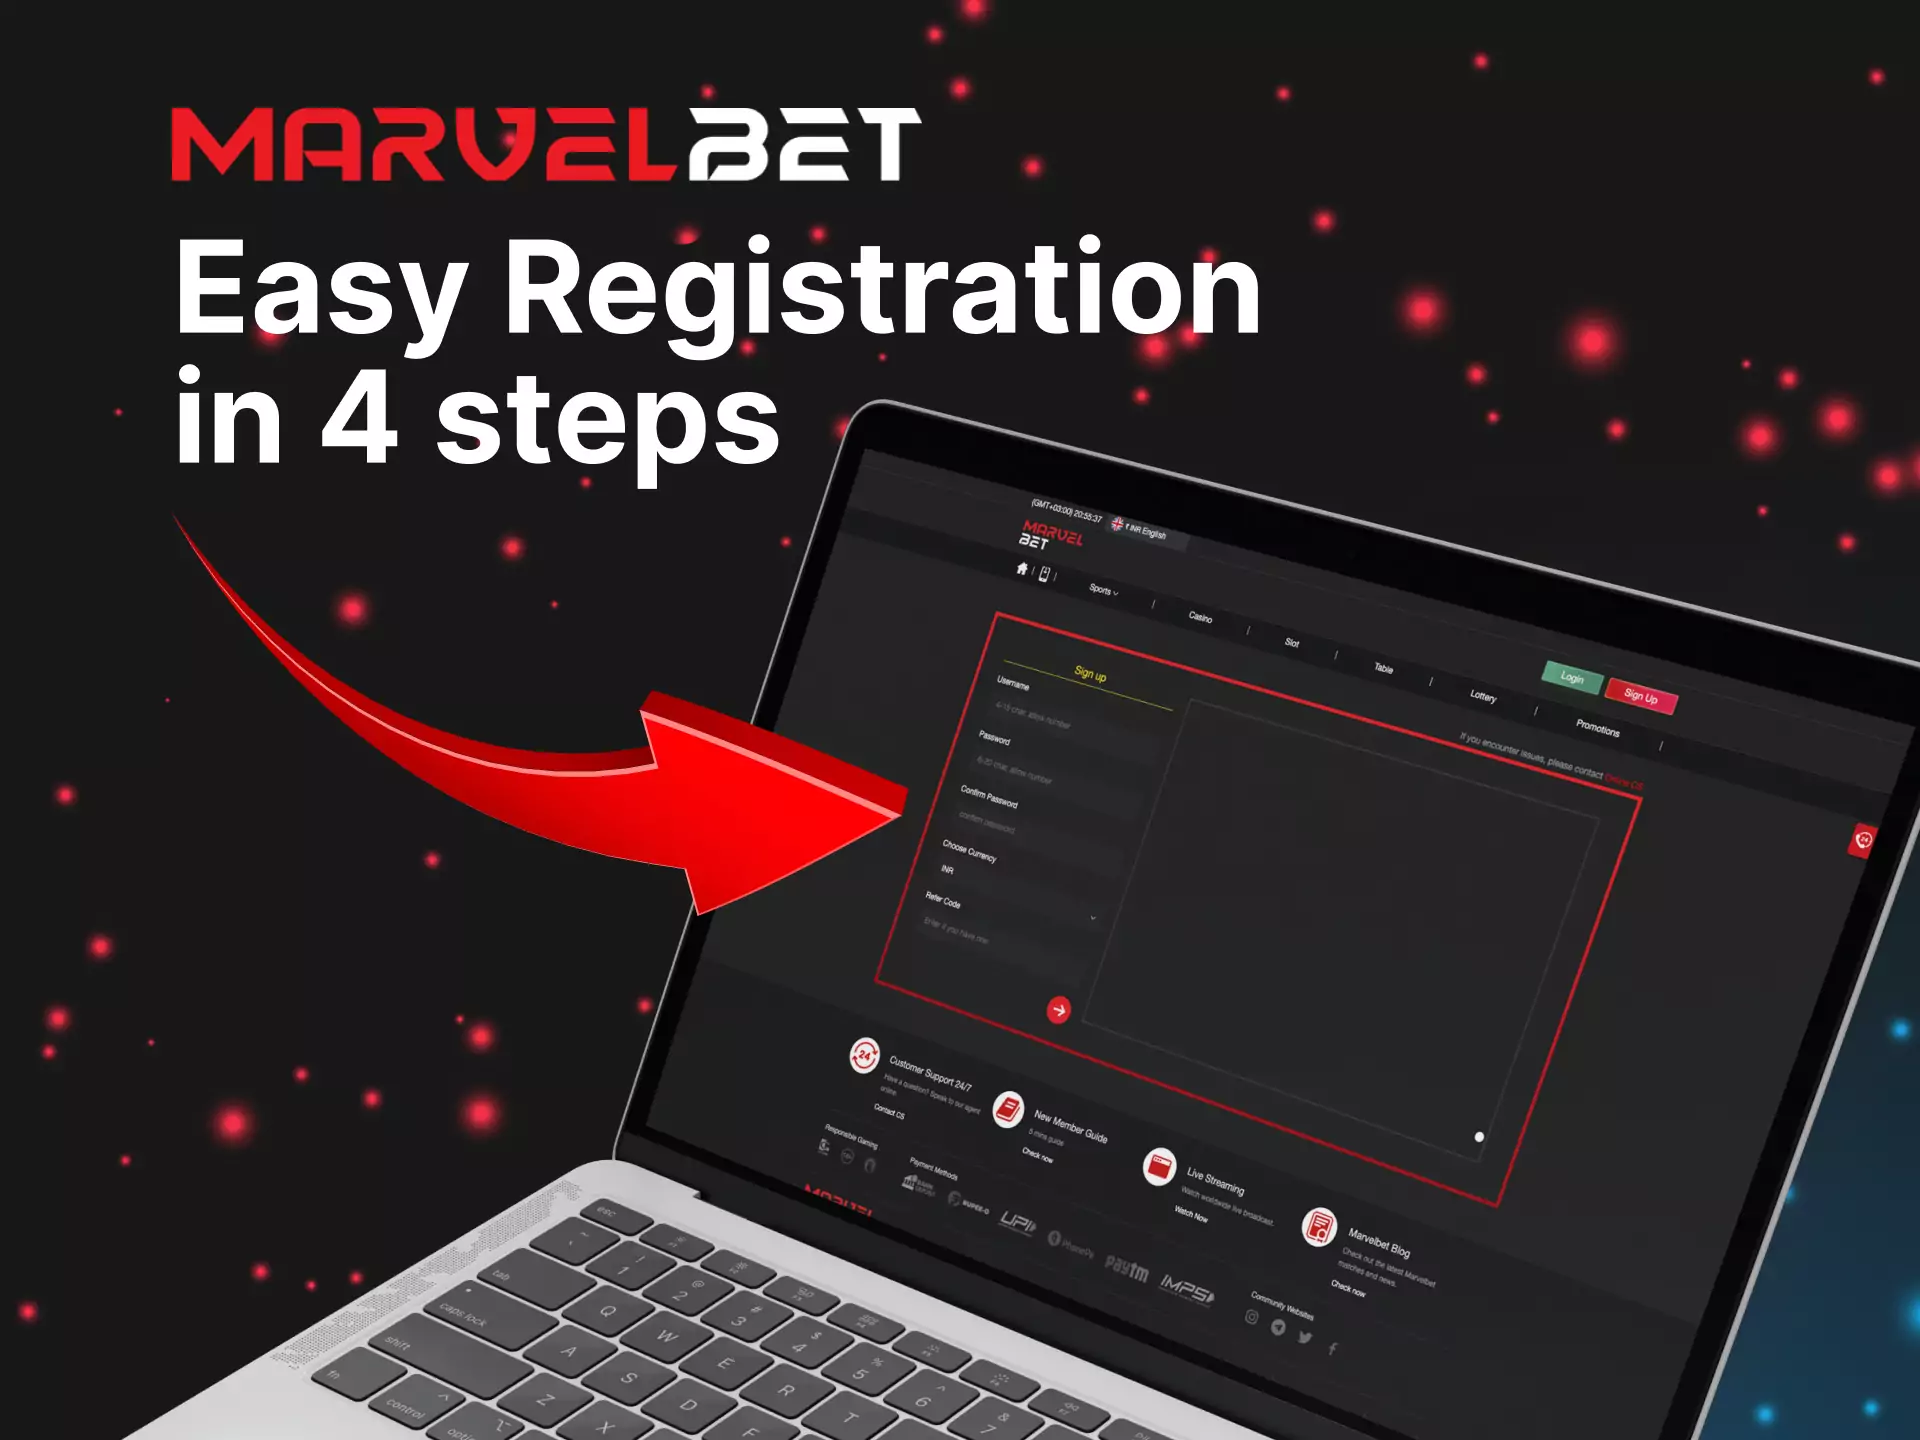 You need only four steps to create a new account on Marvelbet.